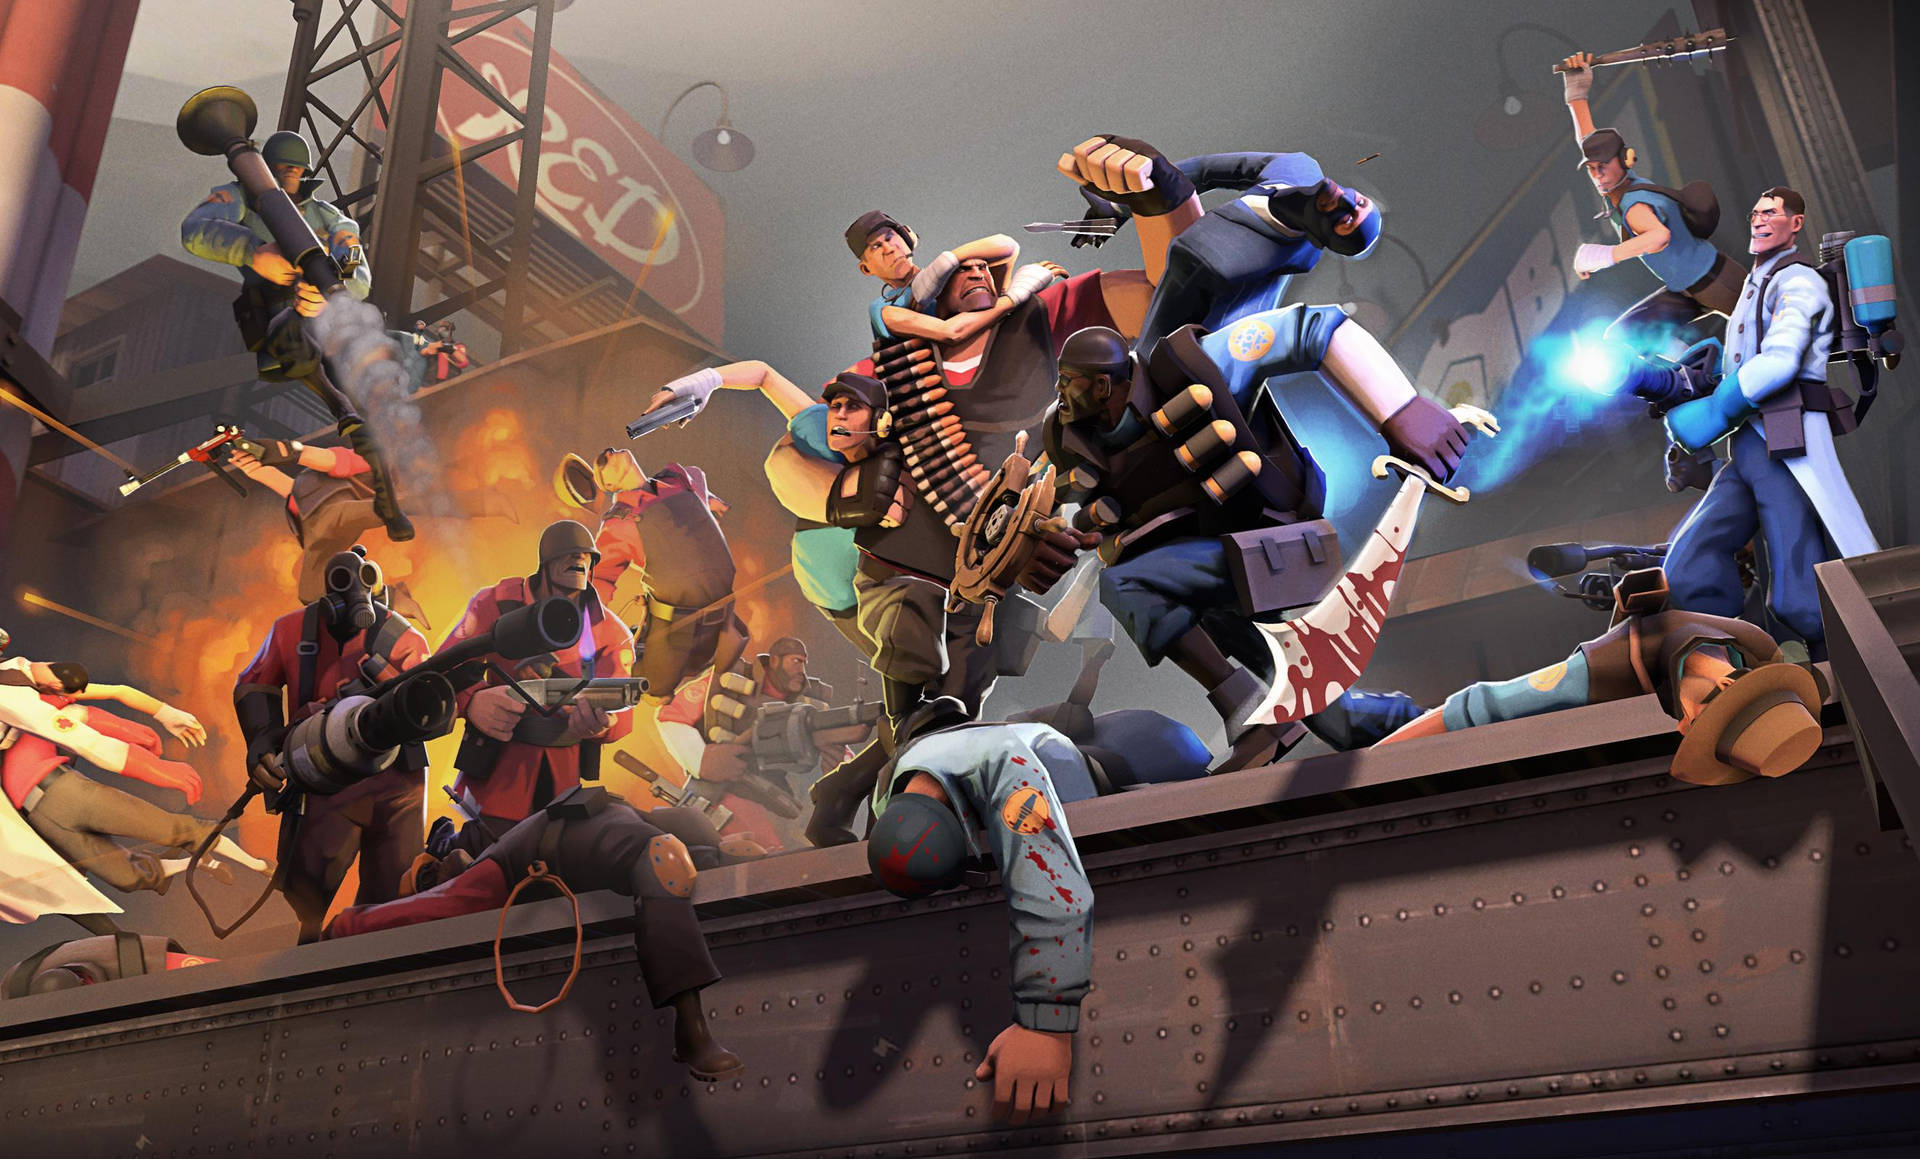 Action-packed Game Of Team Fortress 2